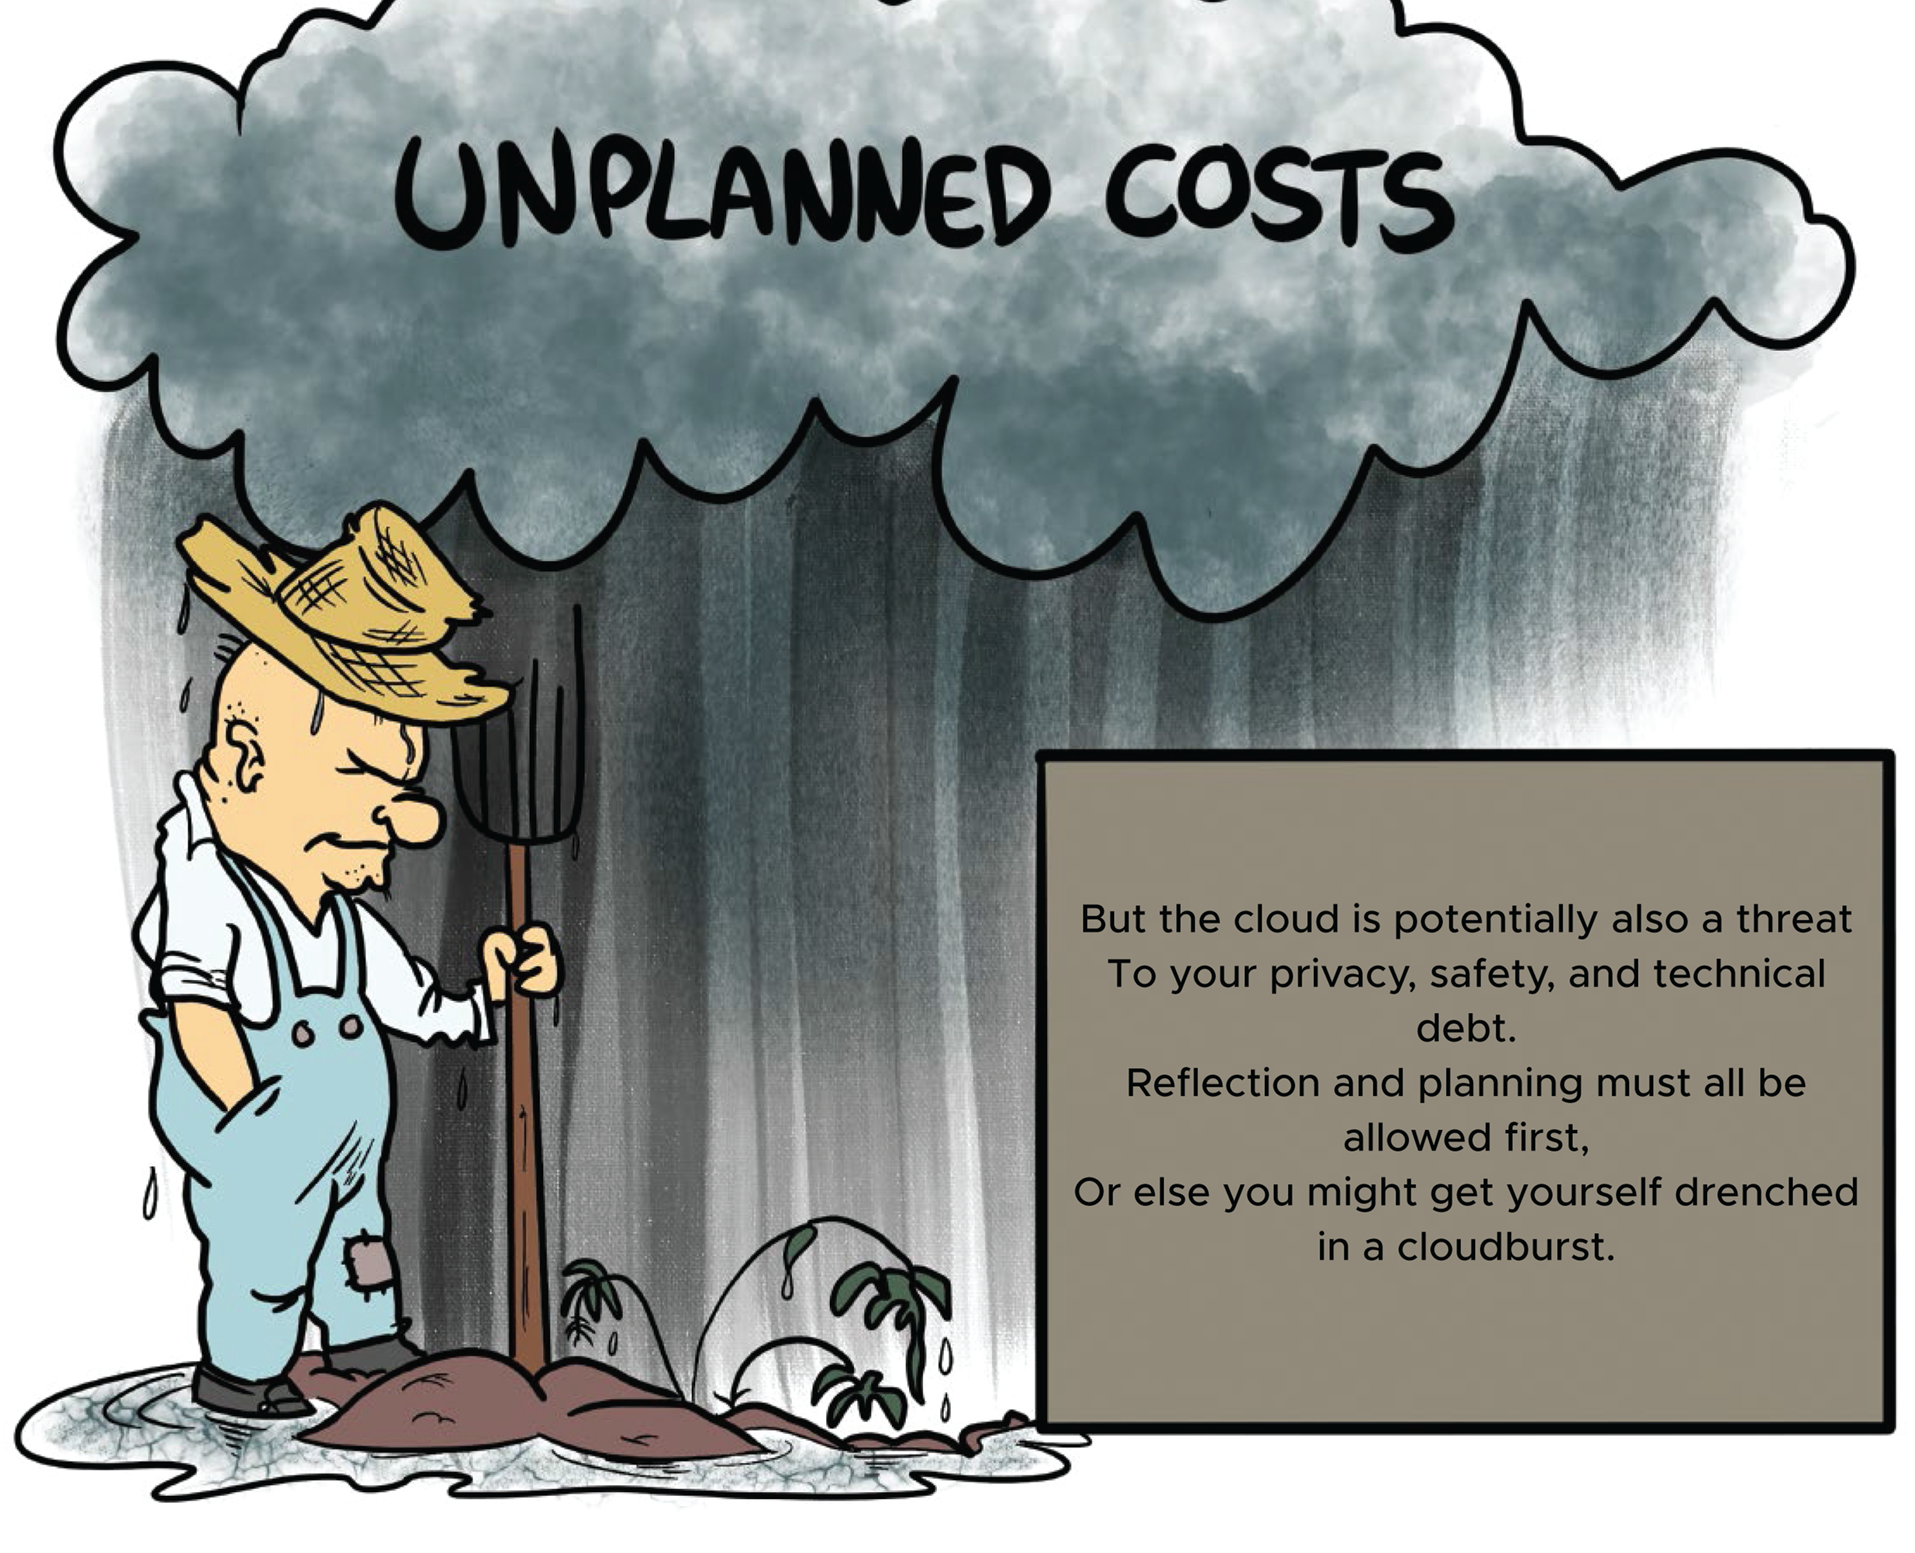 Cartoon illustration of a farmer looking worried about his spoiled plant due to unplanned costs.